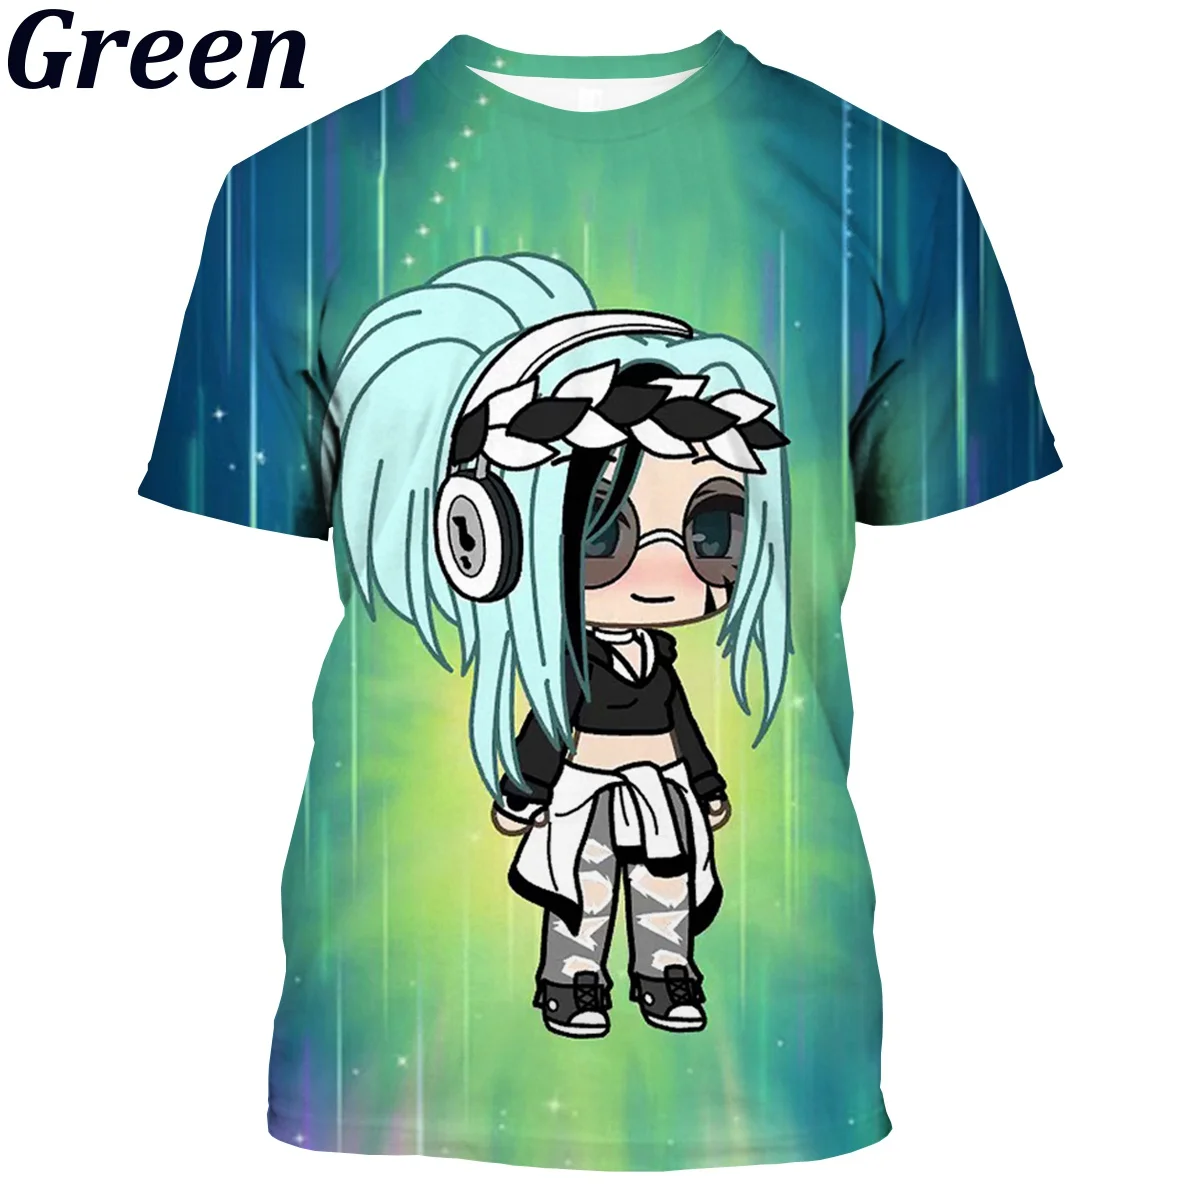 Game Gacha Life T-shirt men's women's summer casual short-sleeved T-shirt anime funny 3D printing images - 6